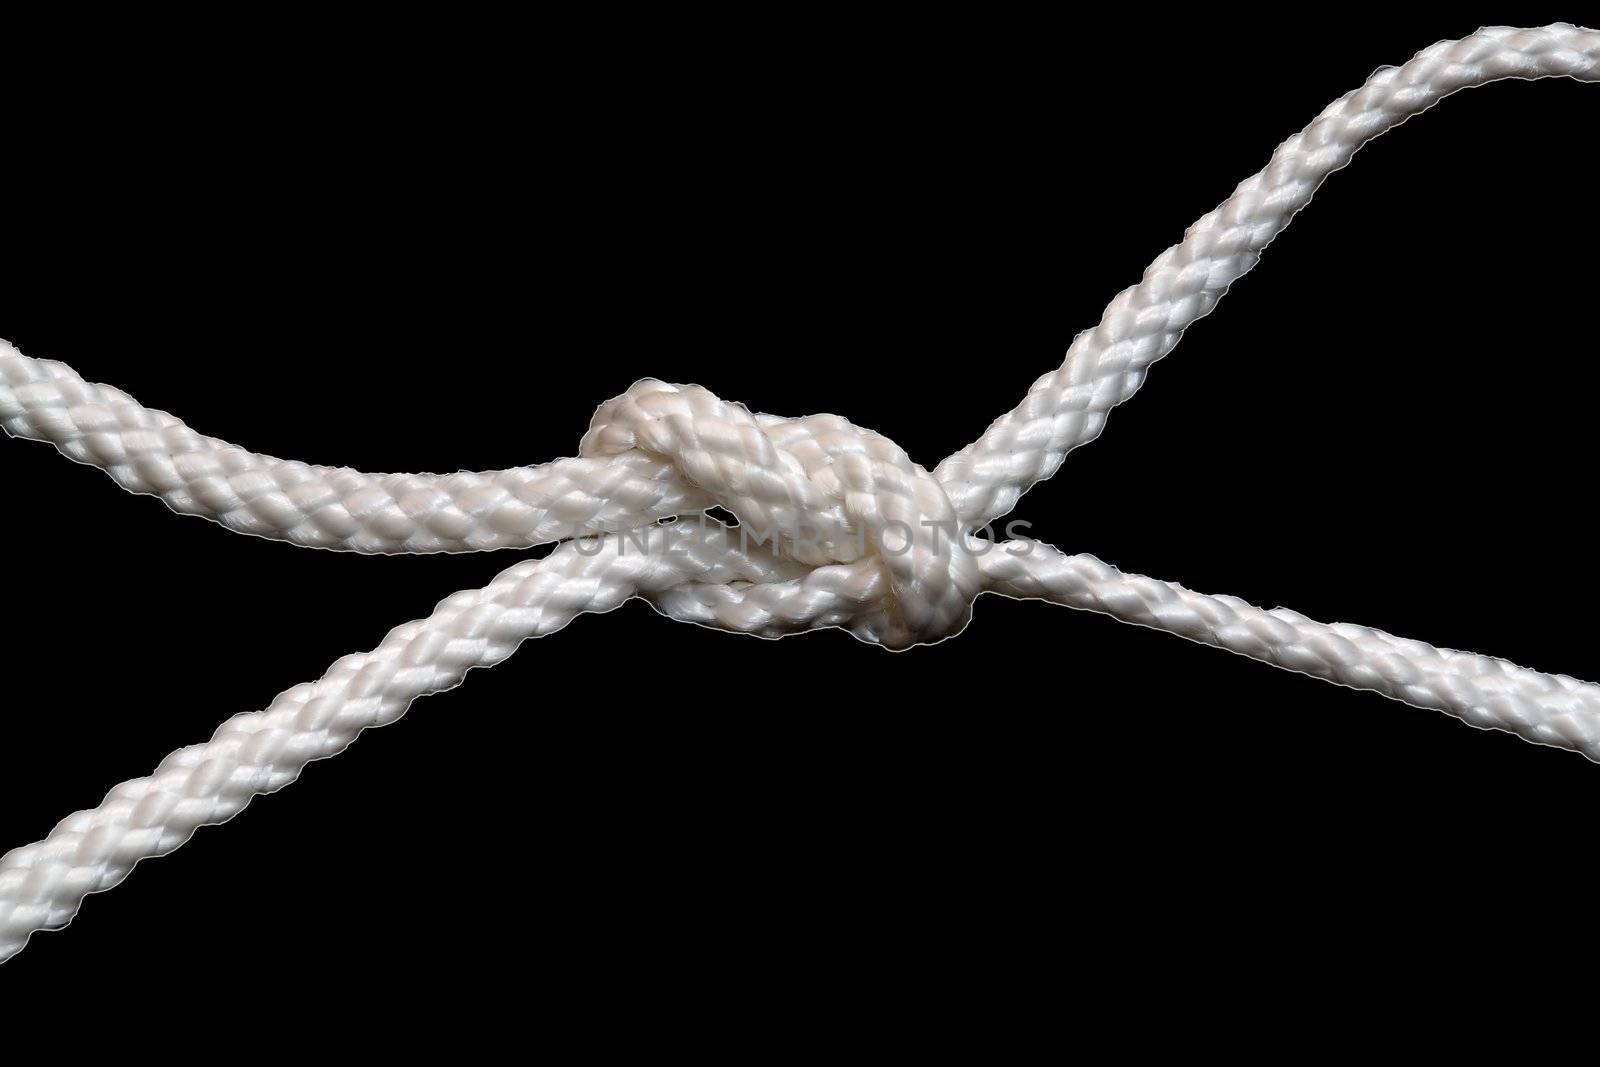 the cord is fastened by sea unit on a black background